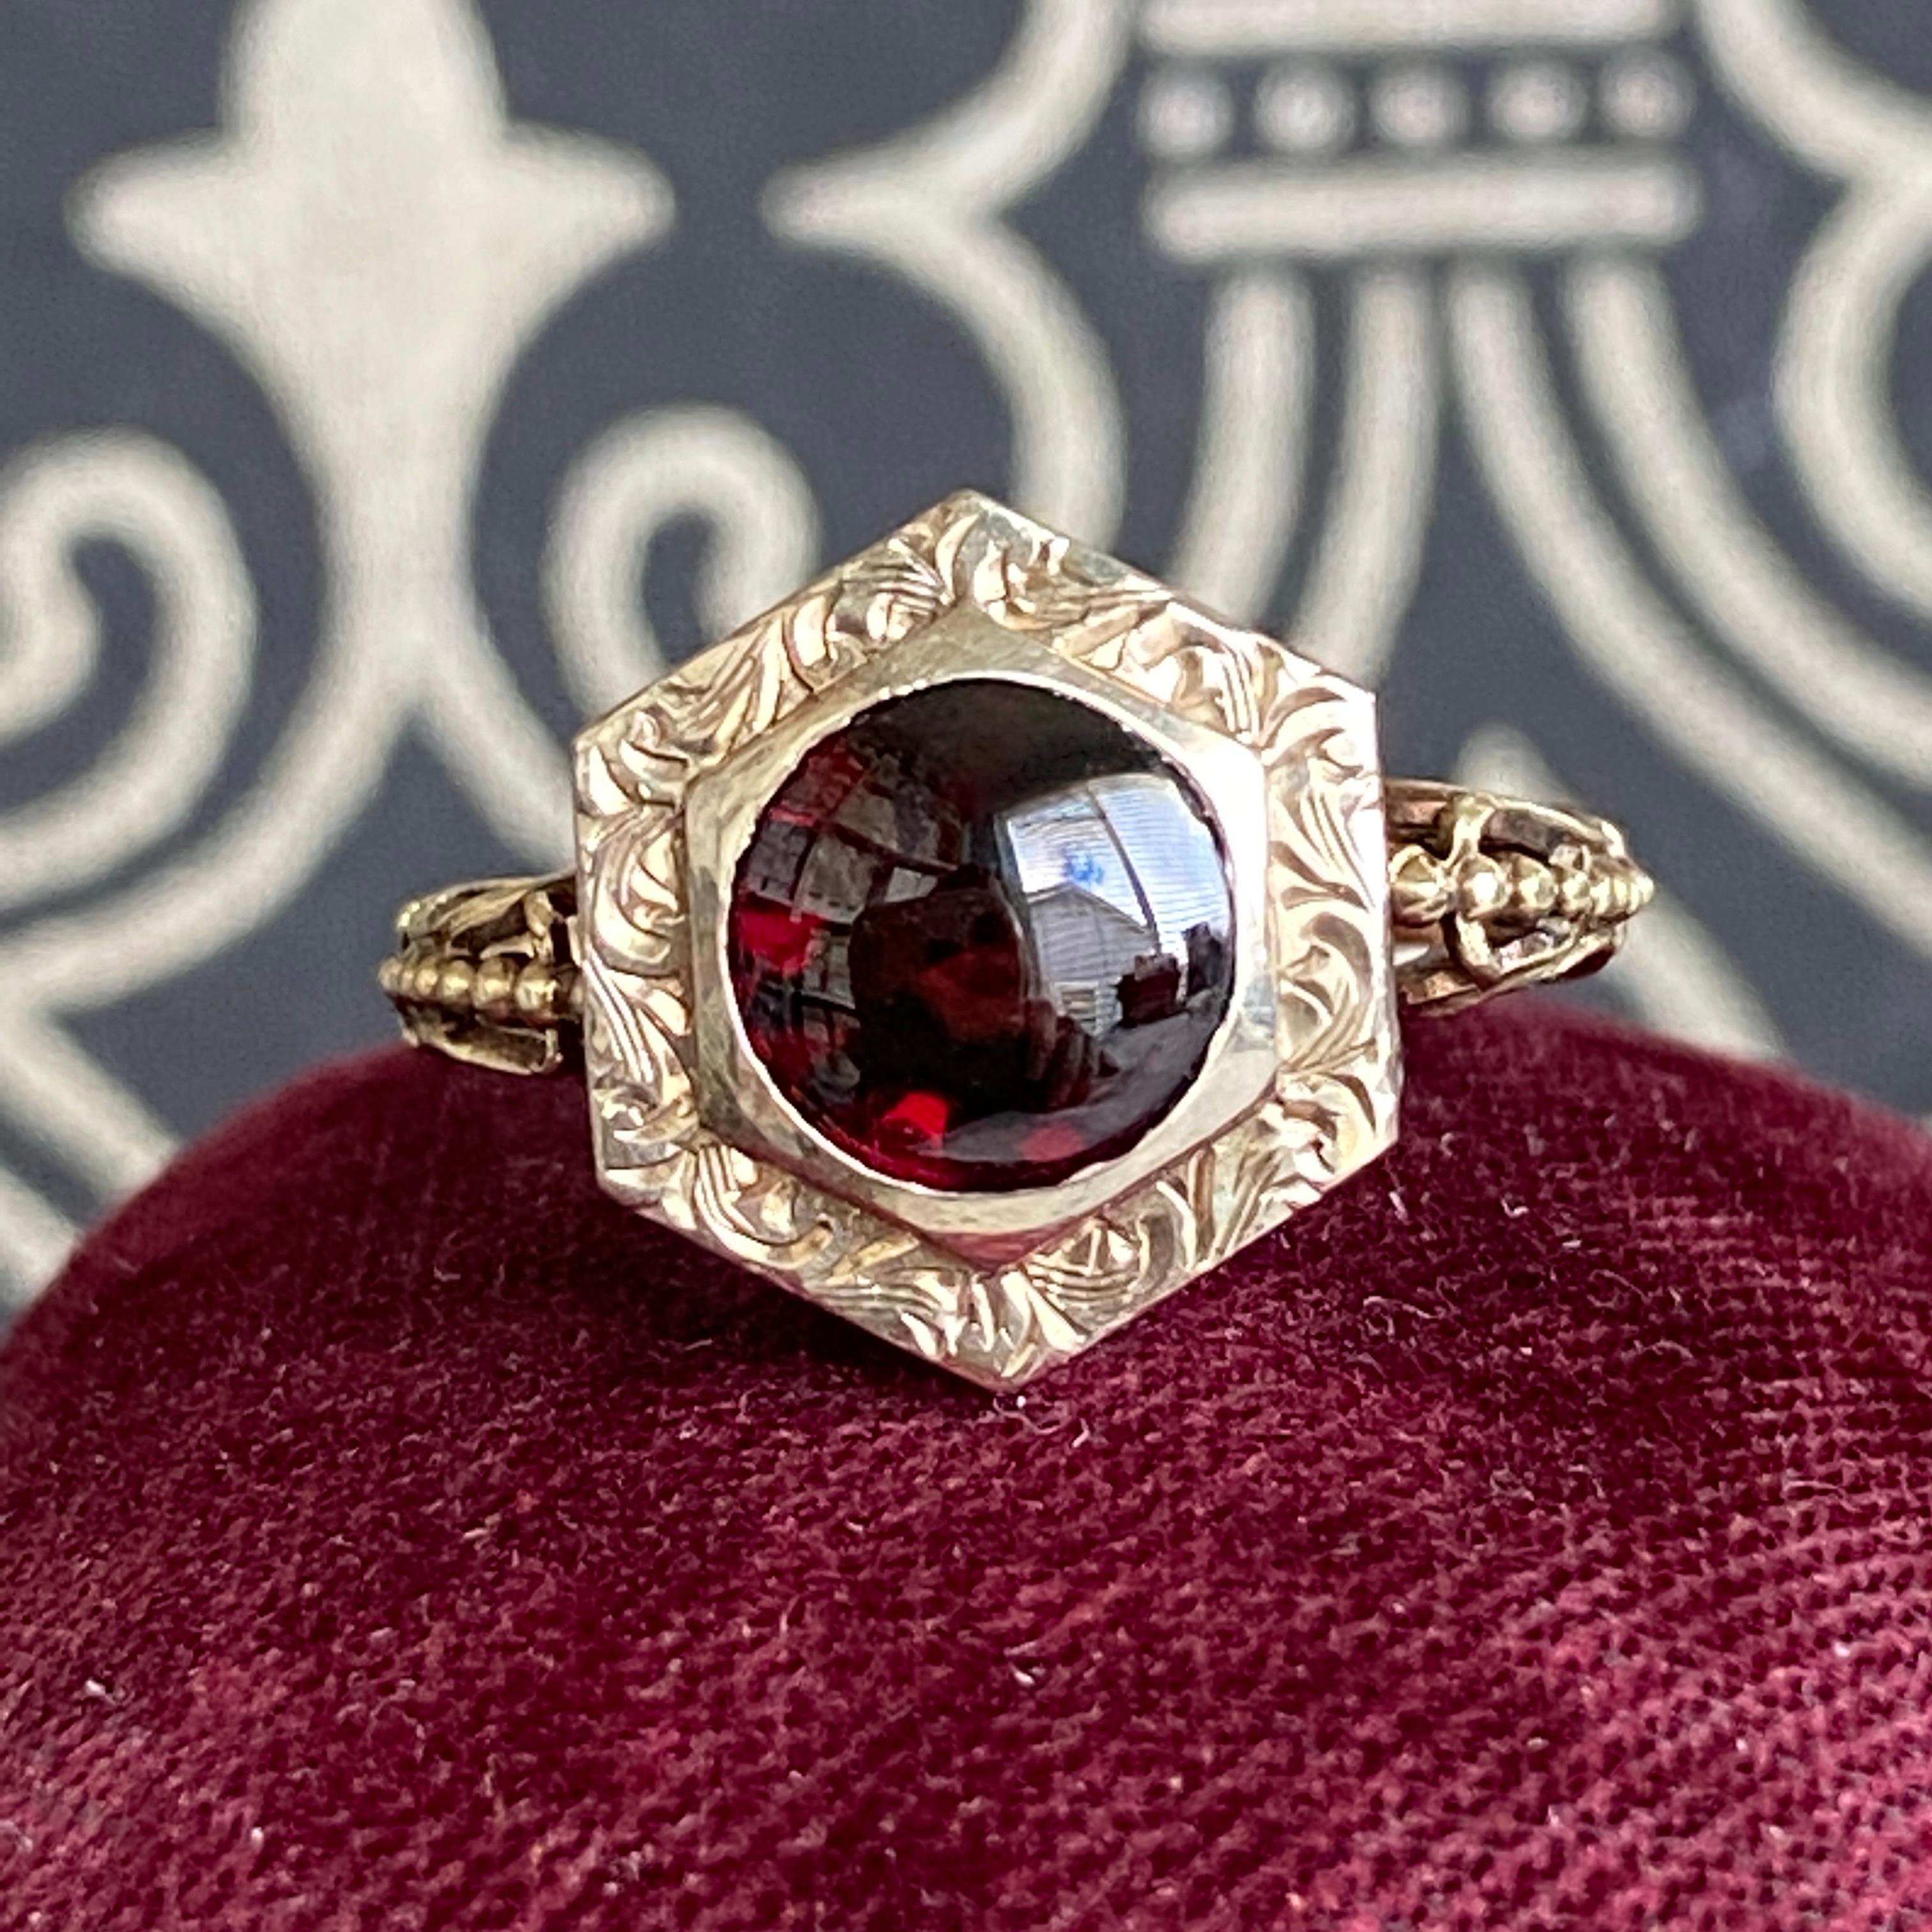 Details: 
A beautiful garnet ring from the Victorian Era (ca 1900's) era. This lovely ring is crafted in 14K yellow gold. The cabochon garnet measures 6.75mm round. The engraving on the sides of the setting is sweetly detailed.

Measurements:
Ring